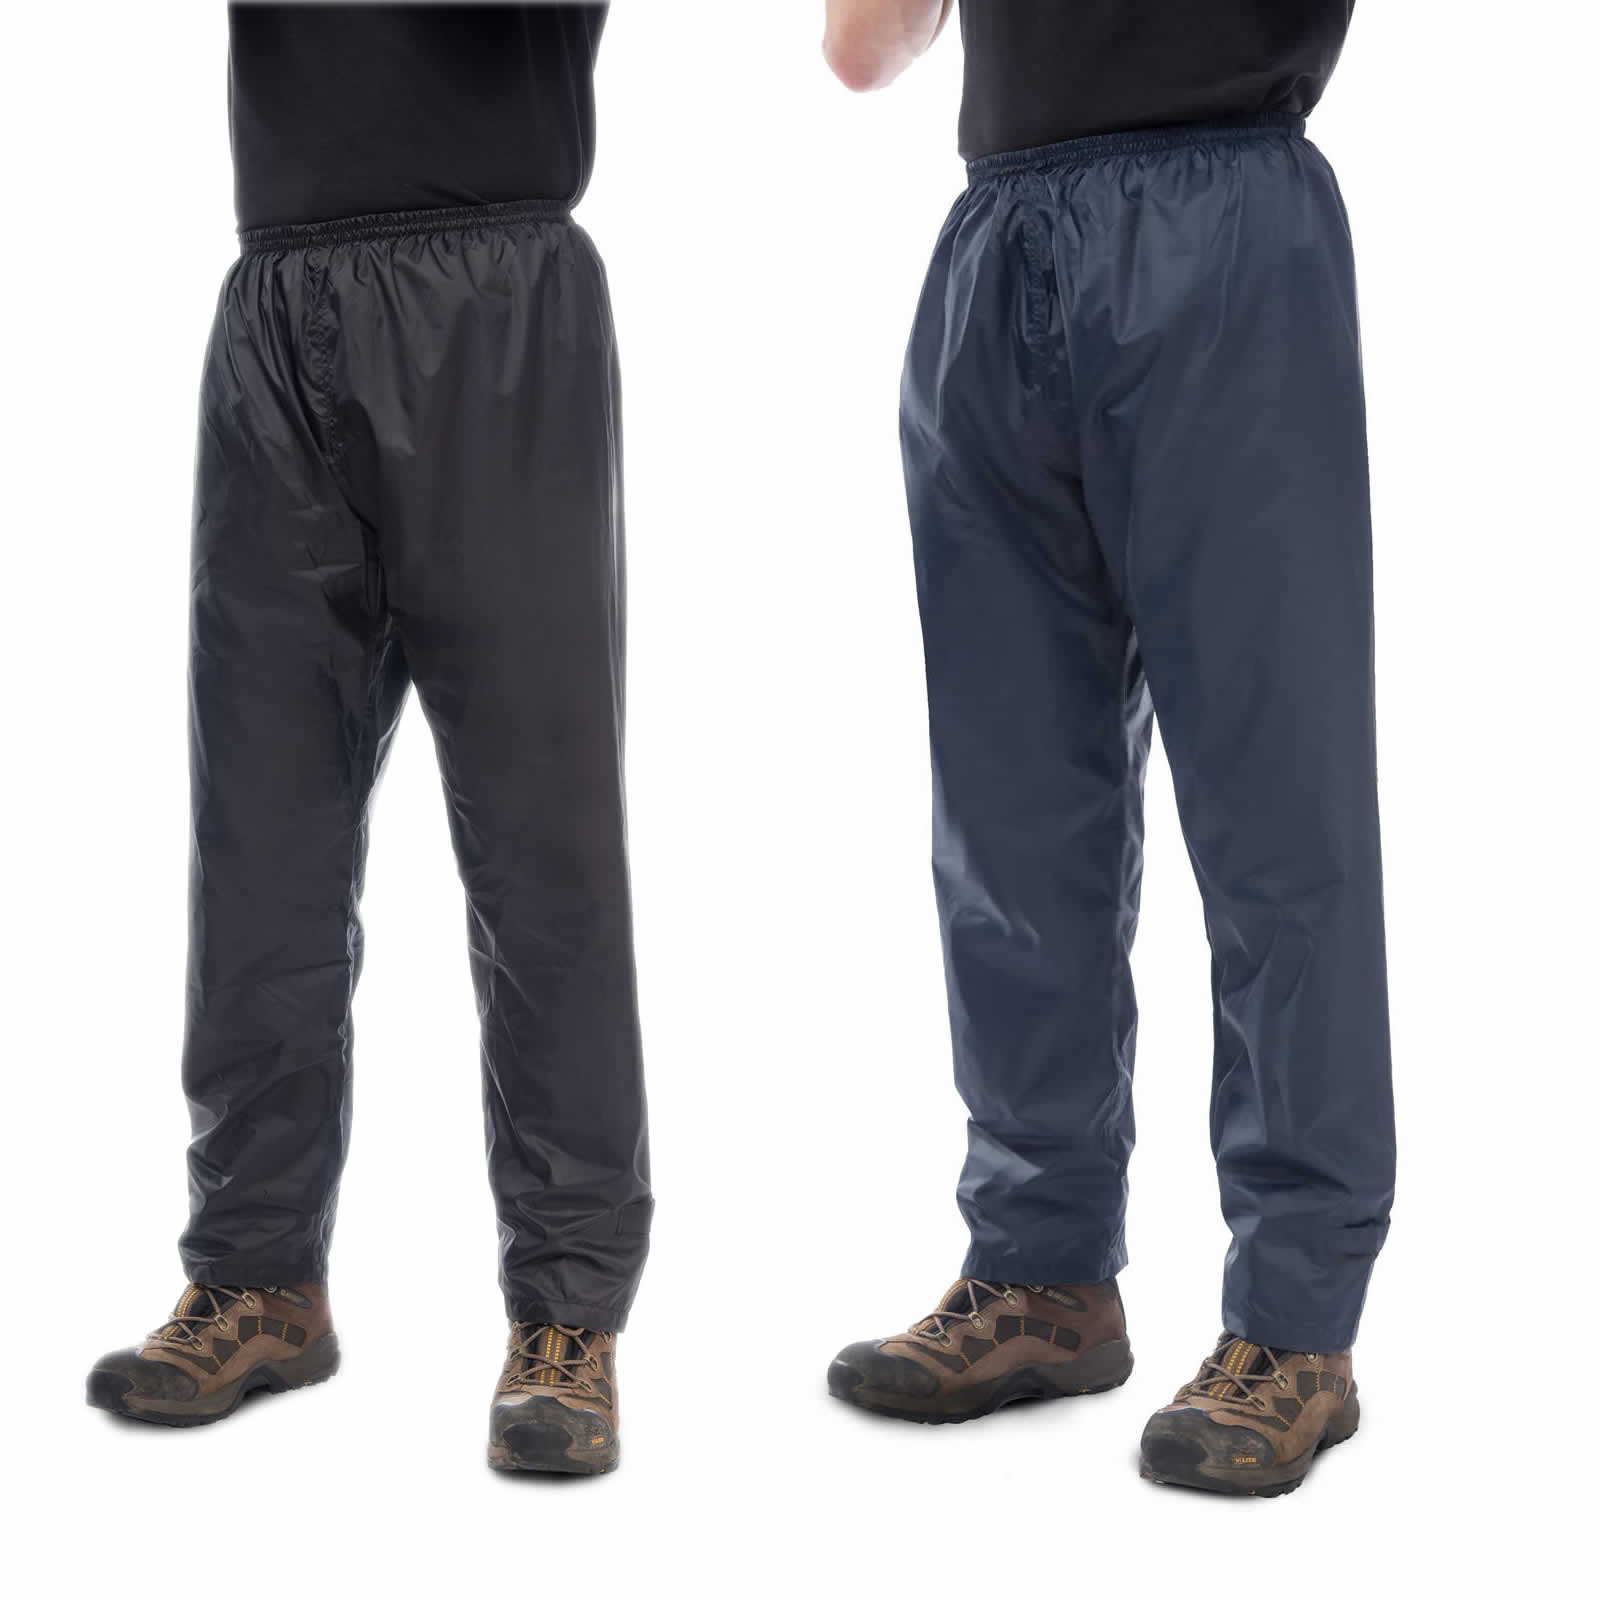 Navy Large Mac in a Sac Unisex Adults Waterproof Overtrousers 